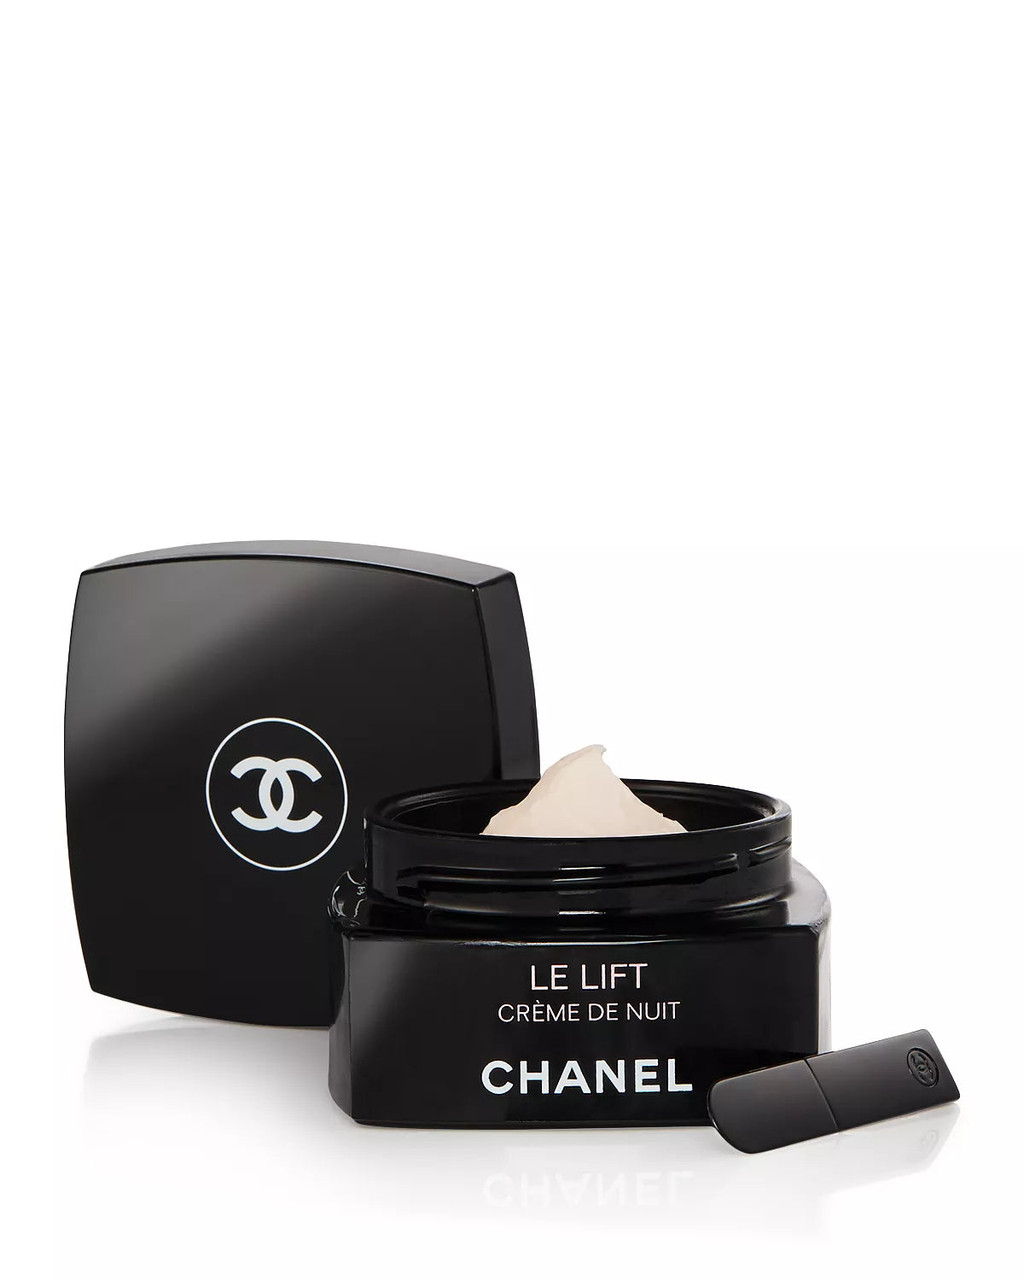 Chanel Le Lift Smoothing Night De and - oz 1.7 Creme Firming Nuit g 50 Cream